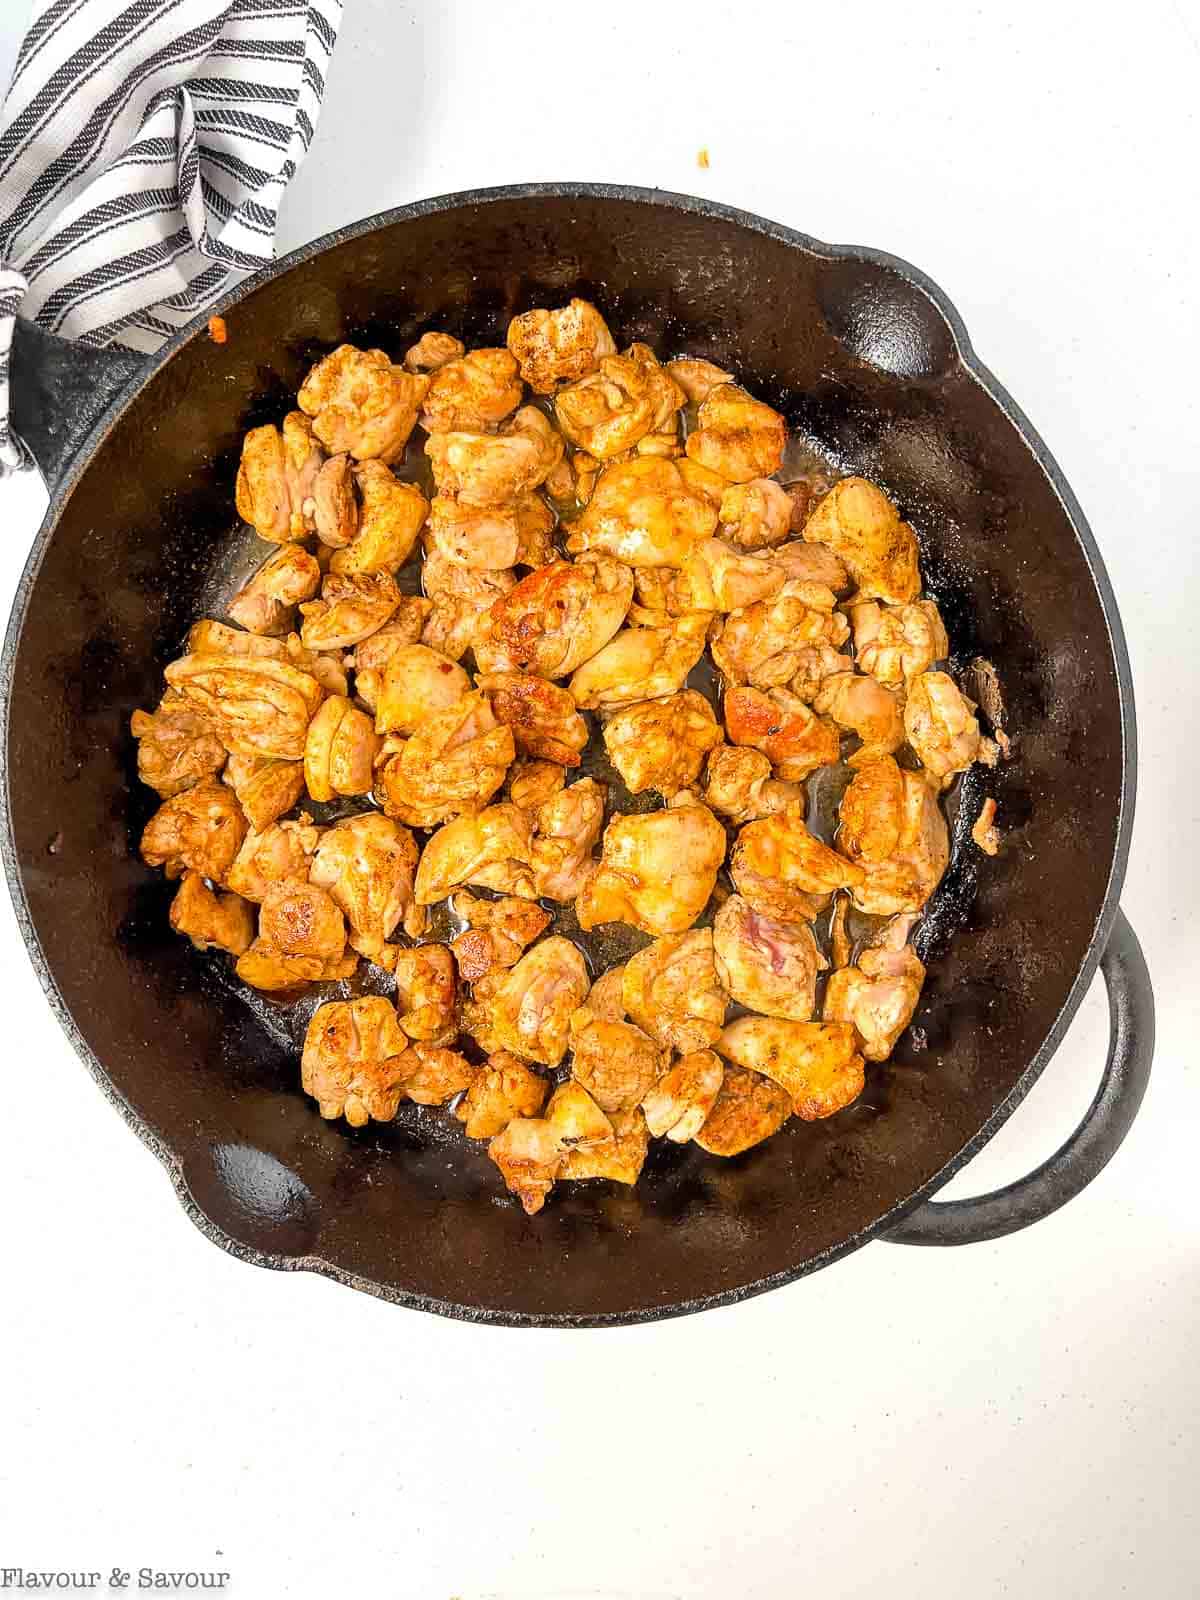 Browned chicken pieces in a cast iron skillet.